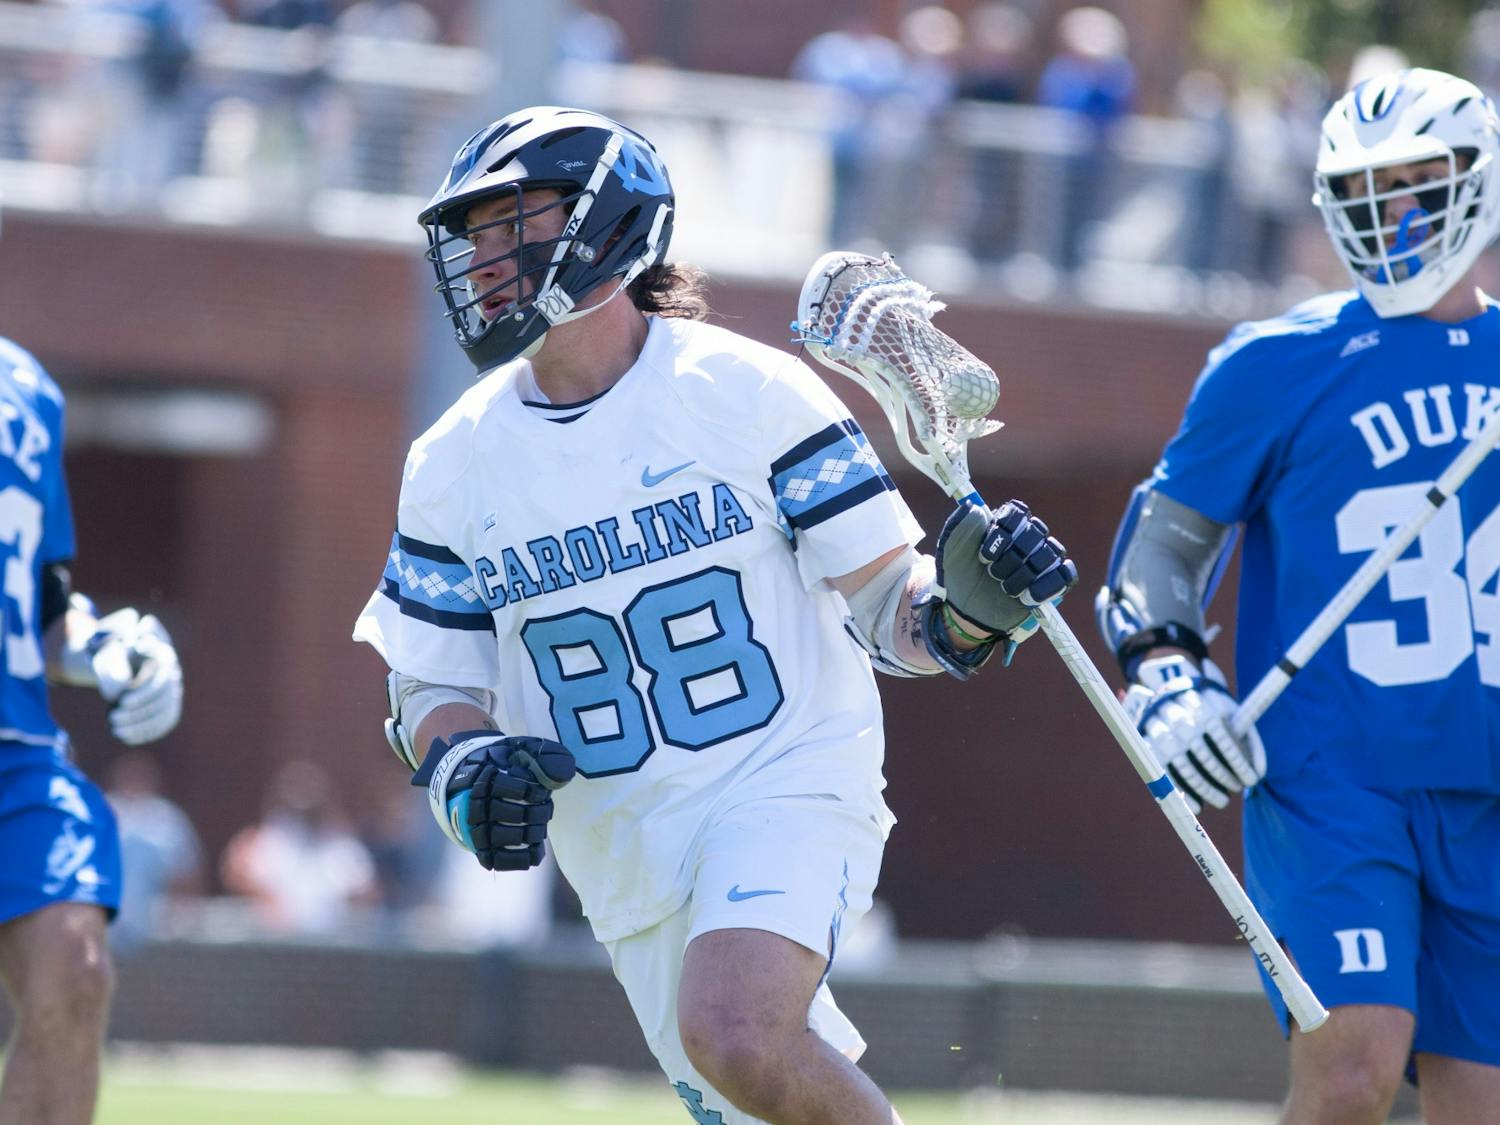 UNC junior defensive midfielder Alex Breschi (88) opens a play during a home game against Duke at Dorrance Field on Saturday Apr. 2, 2022.